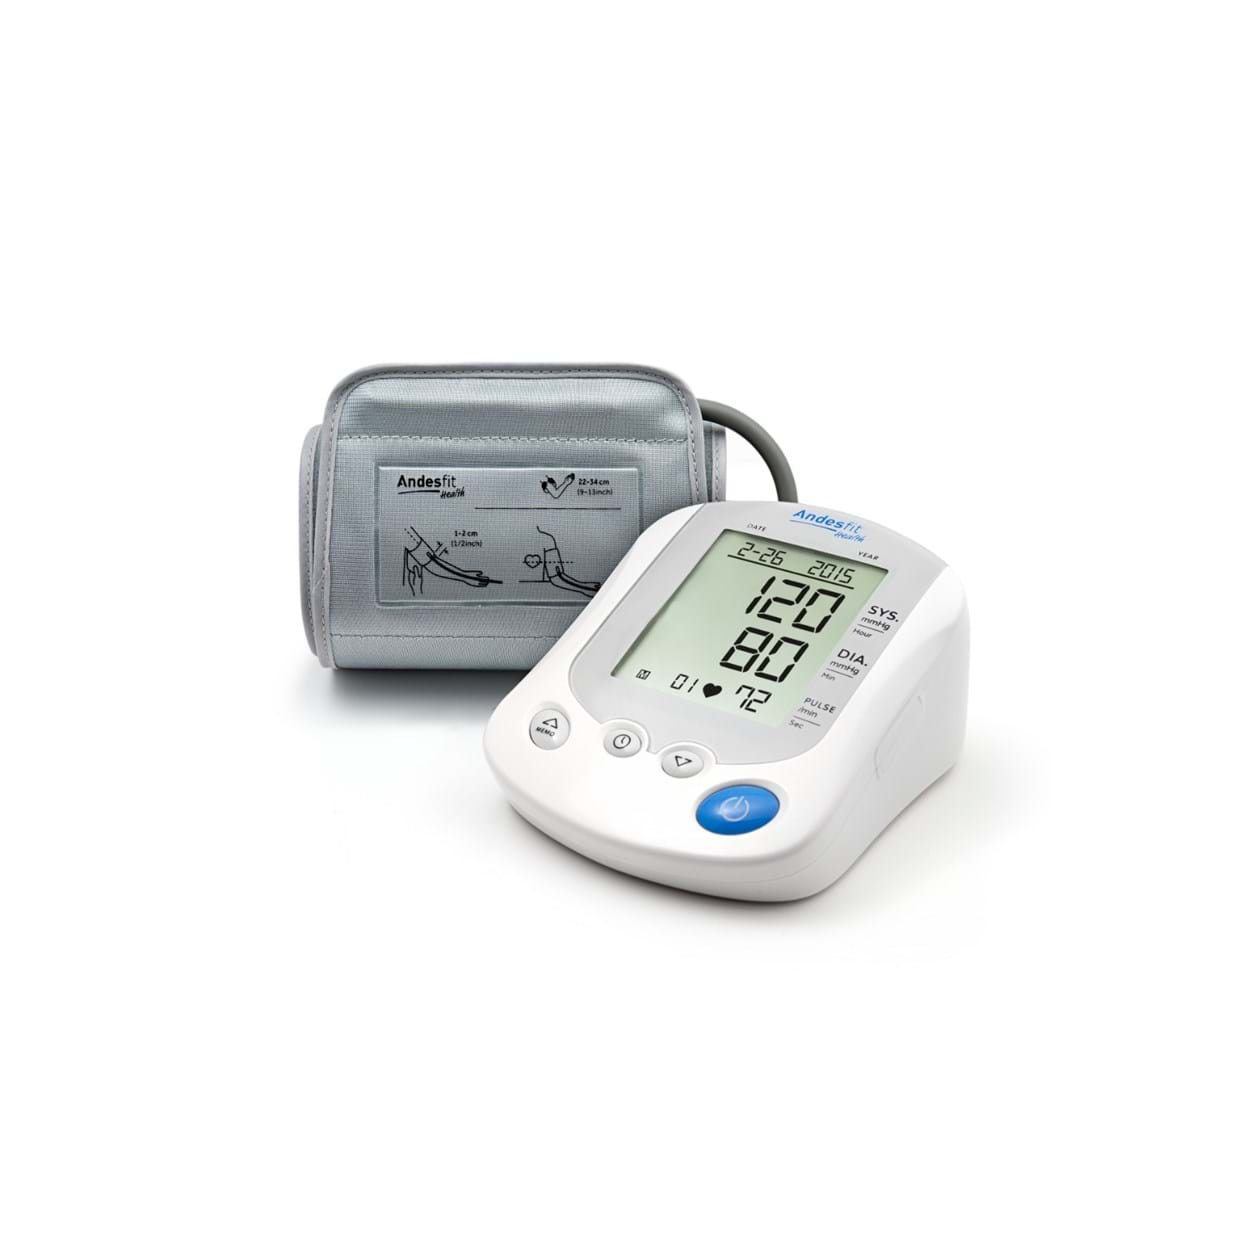 Andestfit Bluetooth 4.0 Arm Type Blood Pressure Monitor ADF-B19 (Delivery Product)